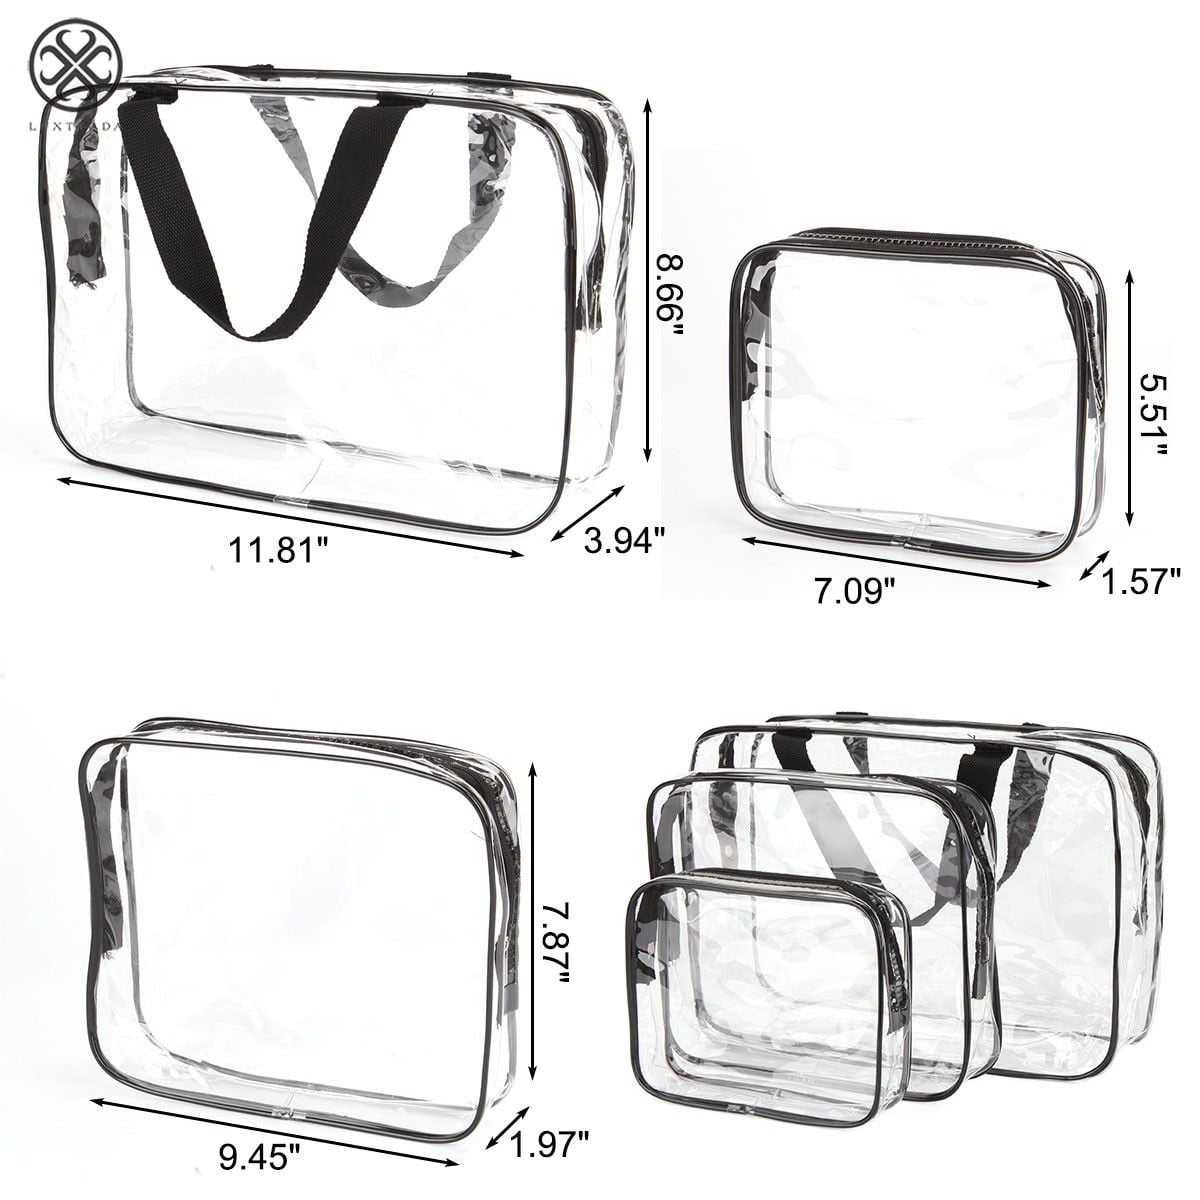 3Pcs Crystal Clear PVC Travel Toiletry Bag Kit for Women Men, Waterproof  Vinyl Organizer Clear Makeup Bags with Zipper Handle Straps, Cosmetic Bag